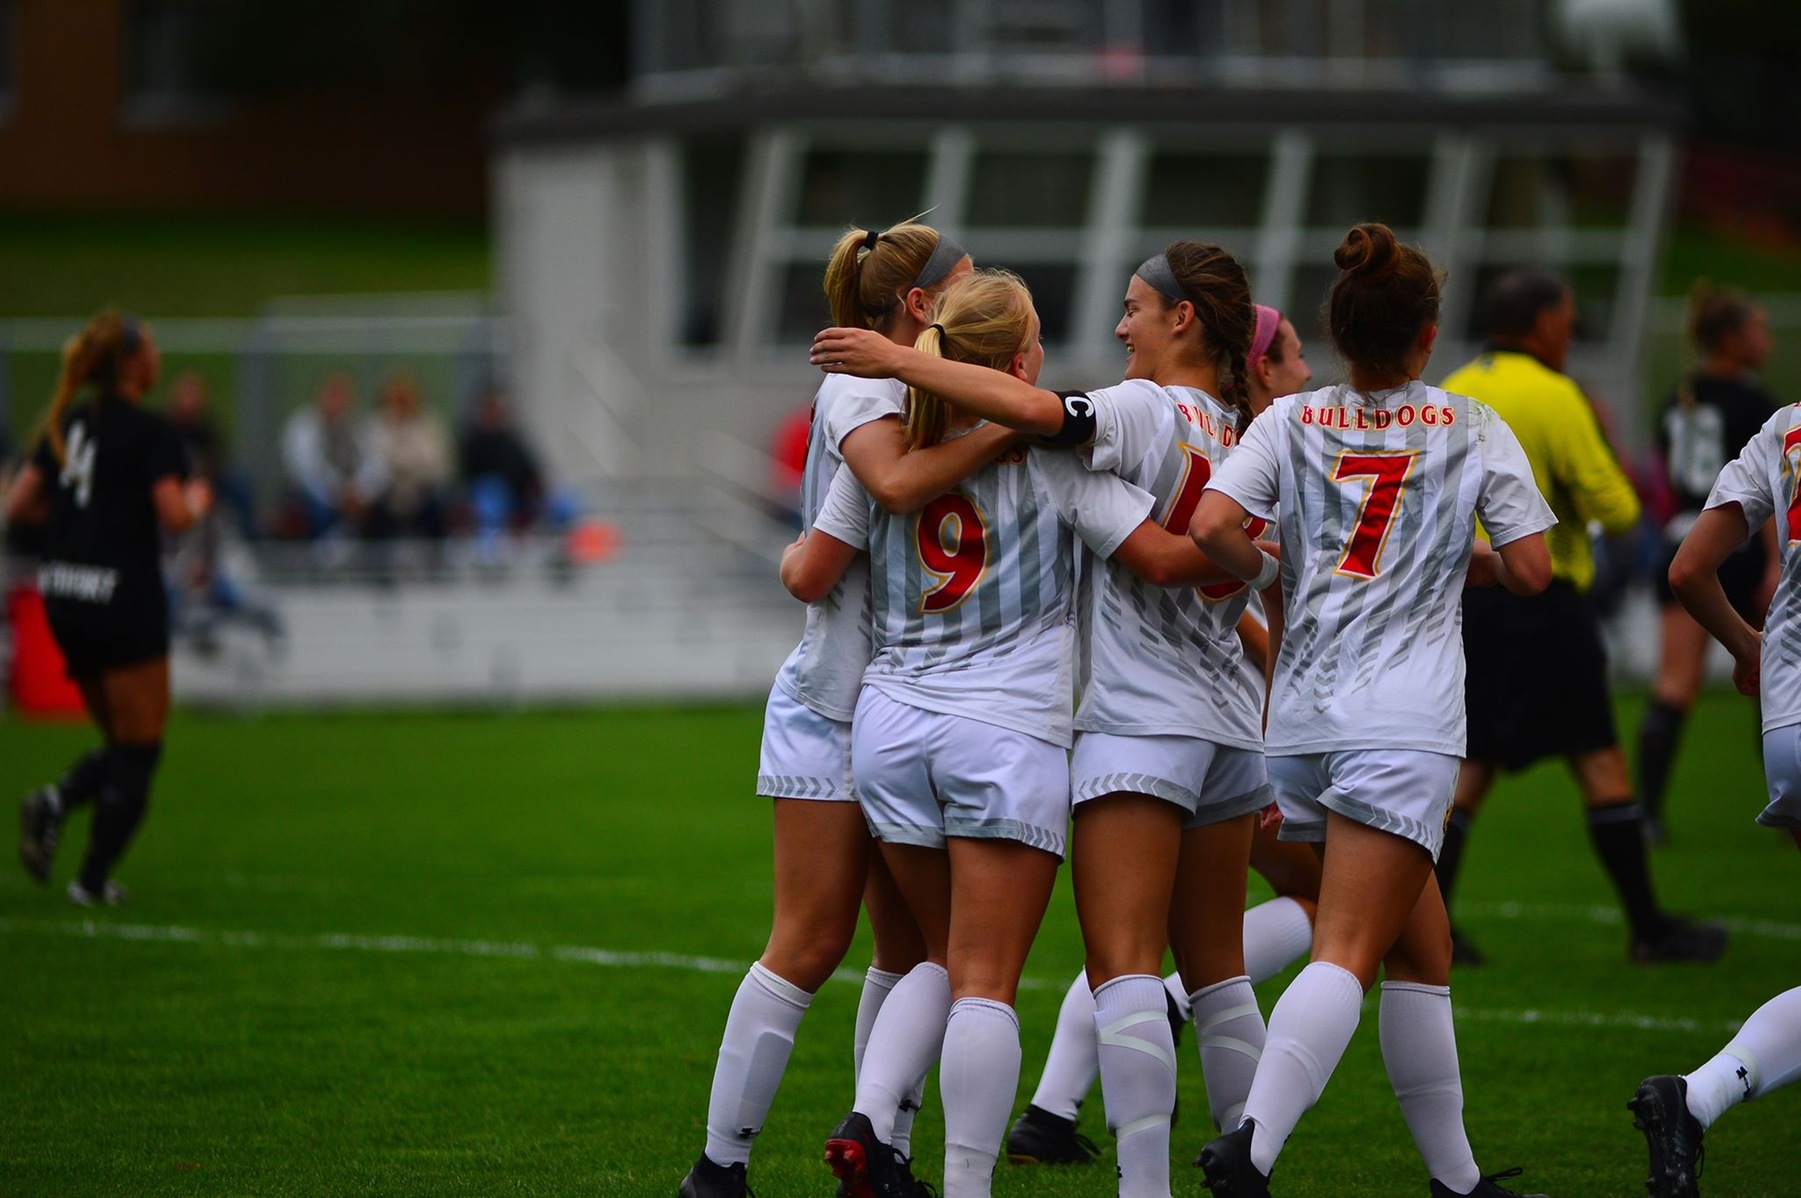 Ferris State Erupts For Six Goals In Win Over Davenport